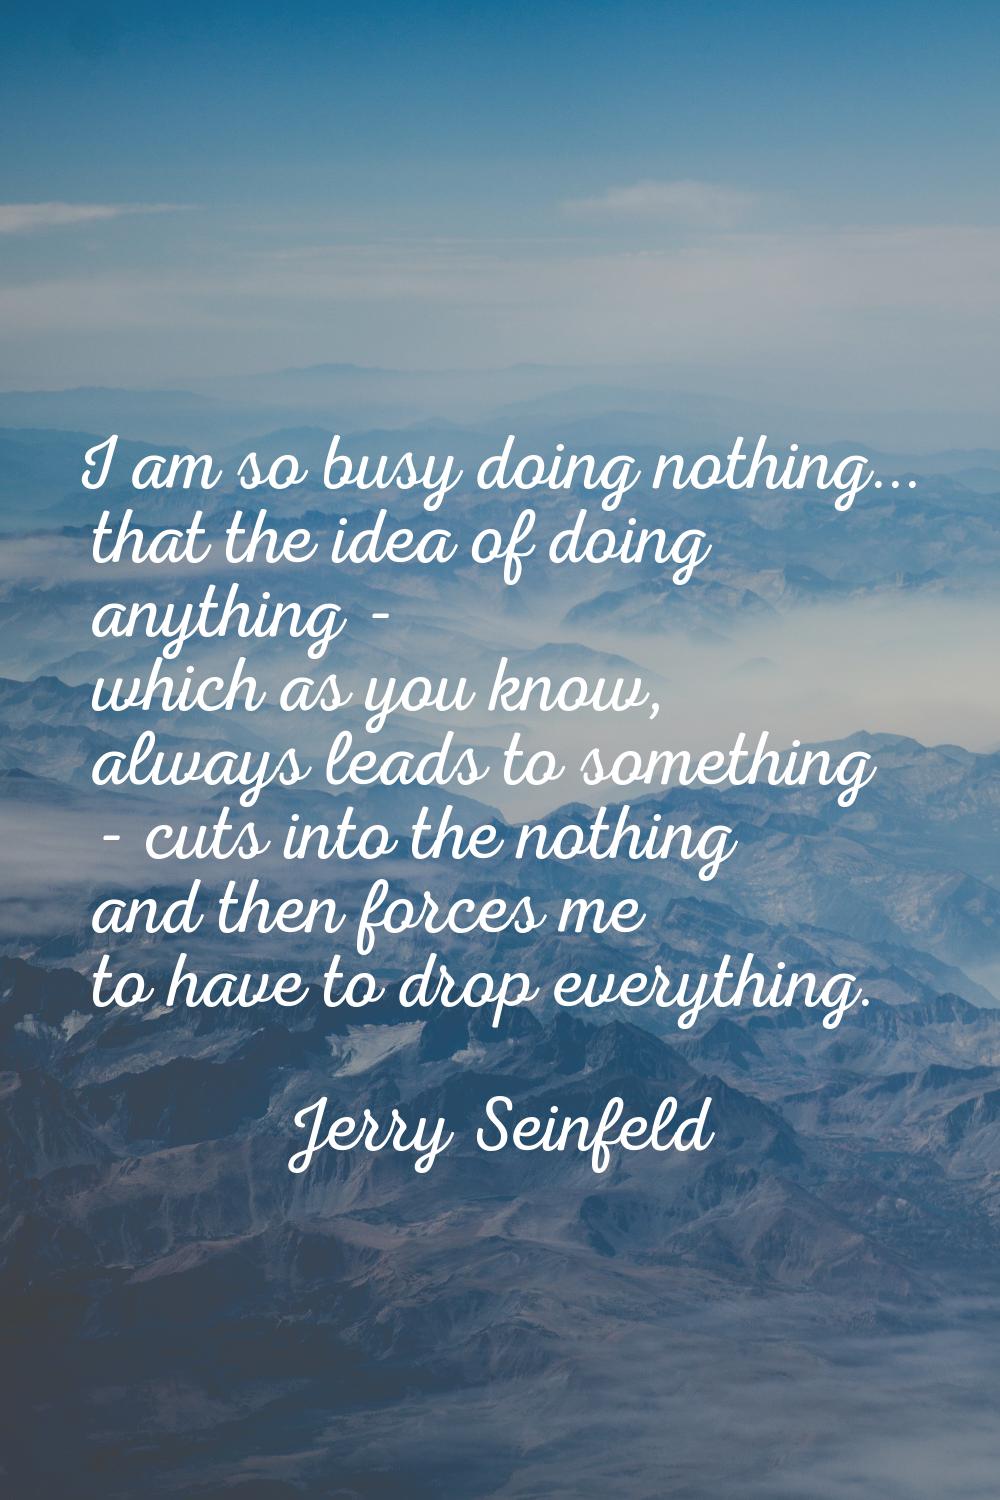 I am so busy doing nothing... that the idea of doing anything - which as you know, always leads to 